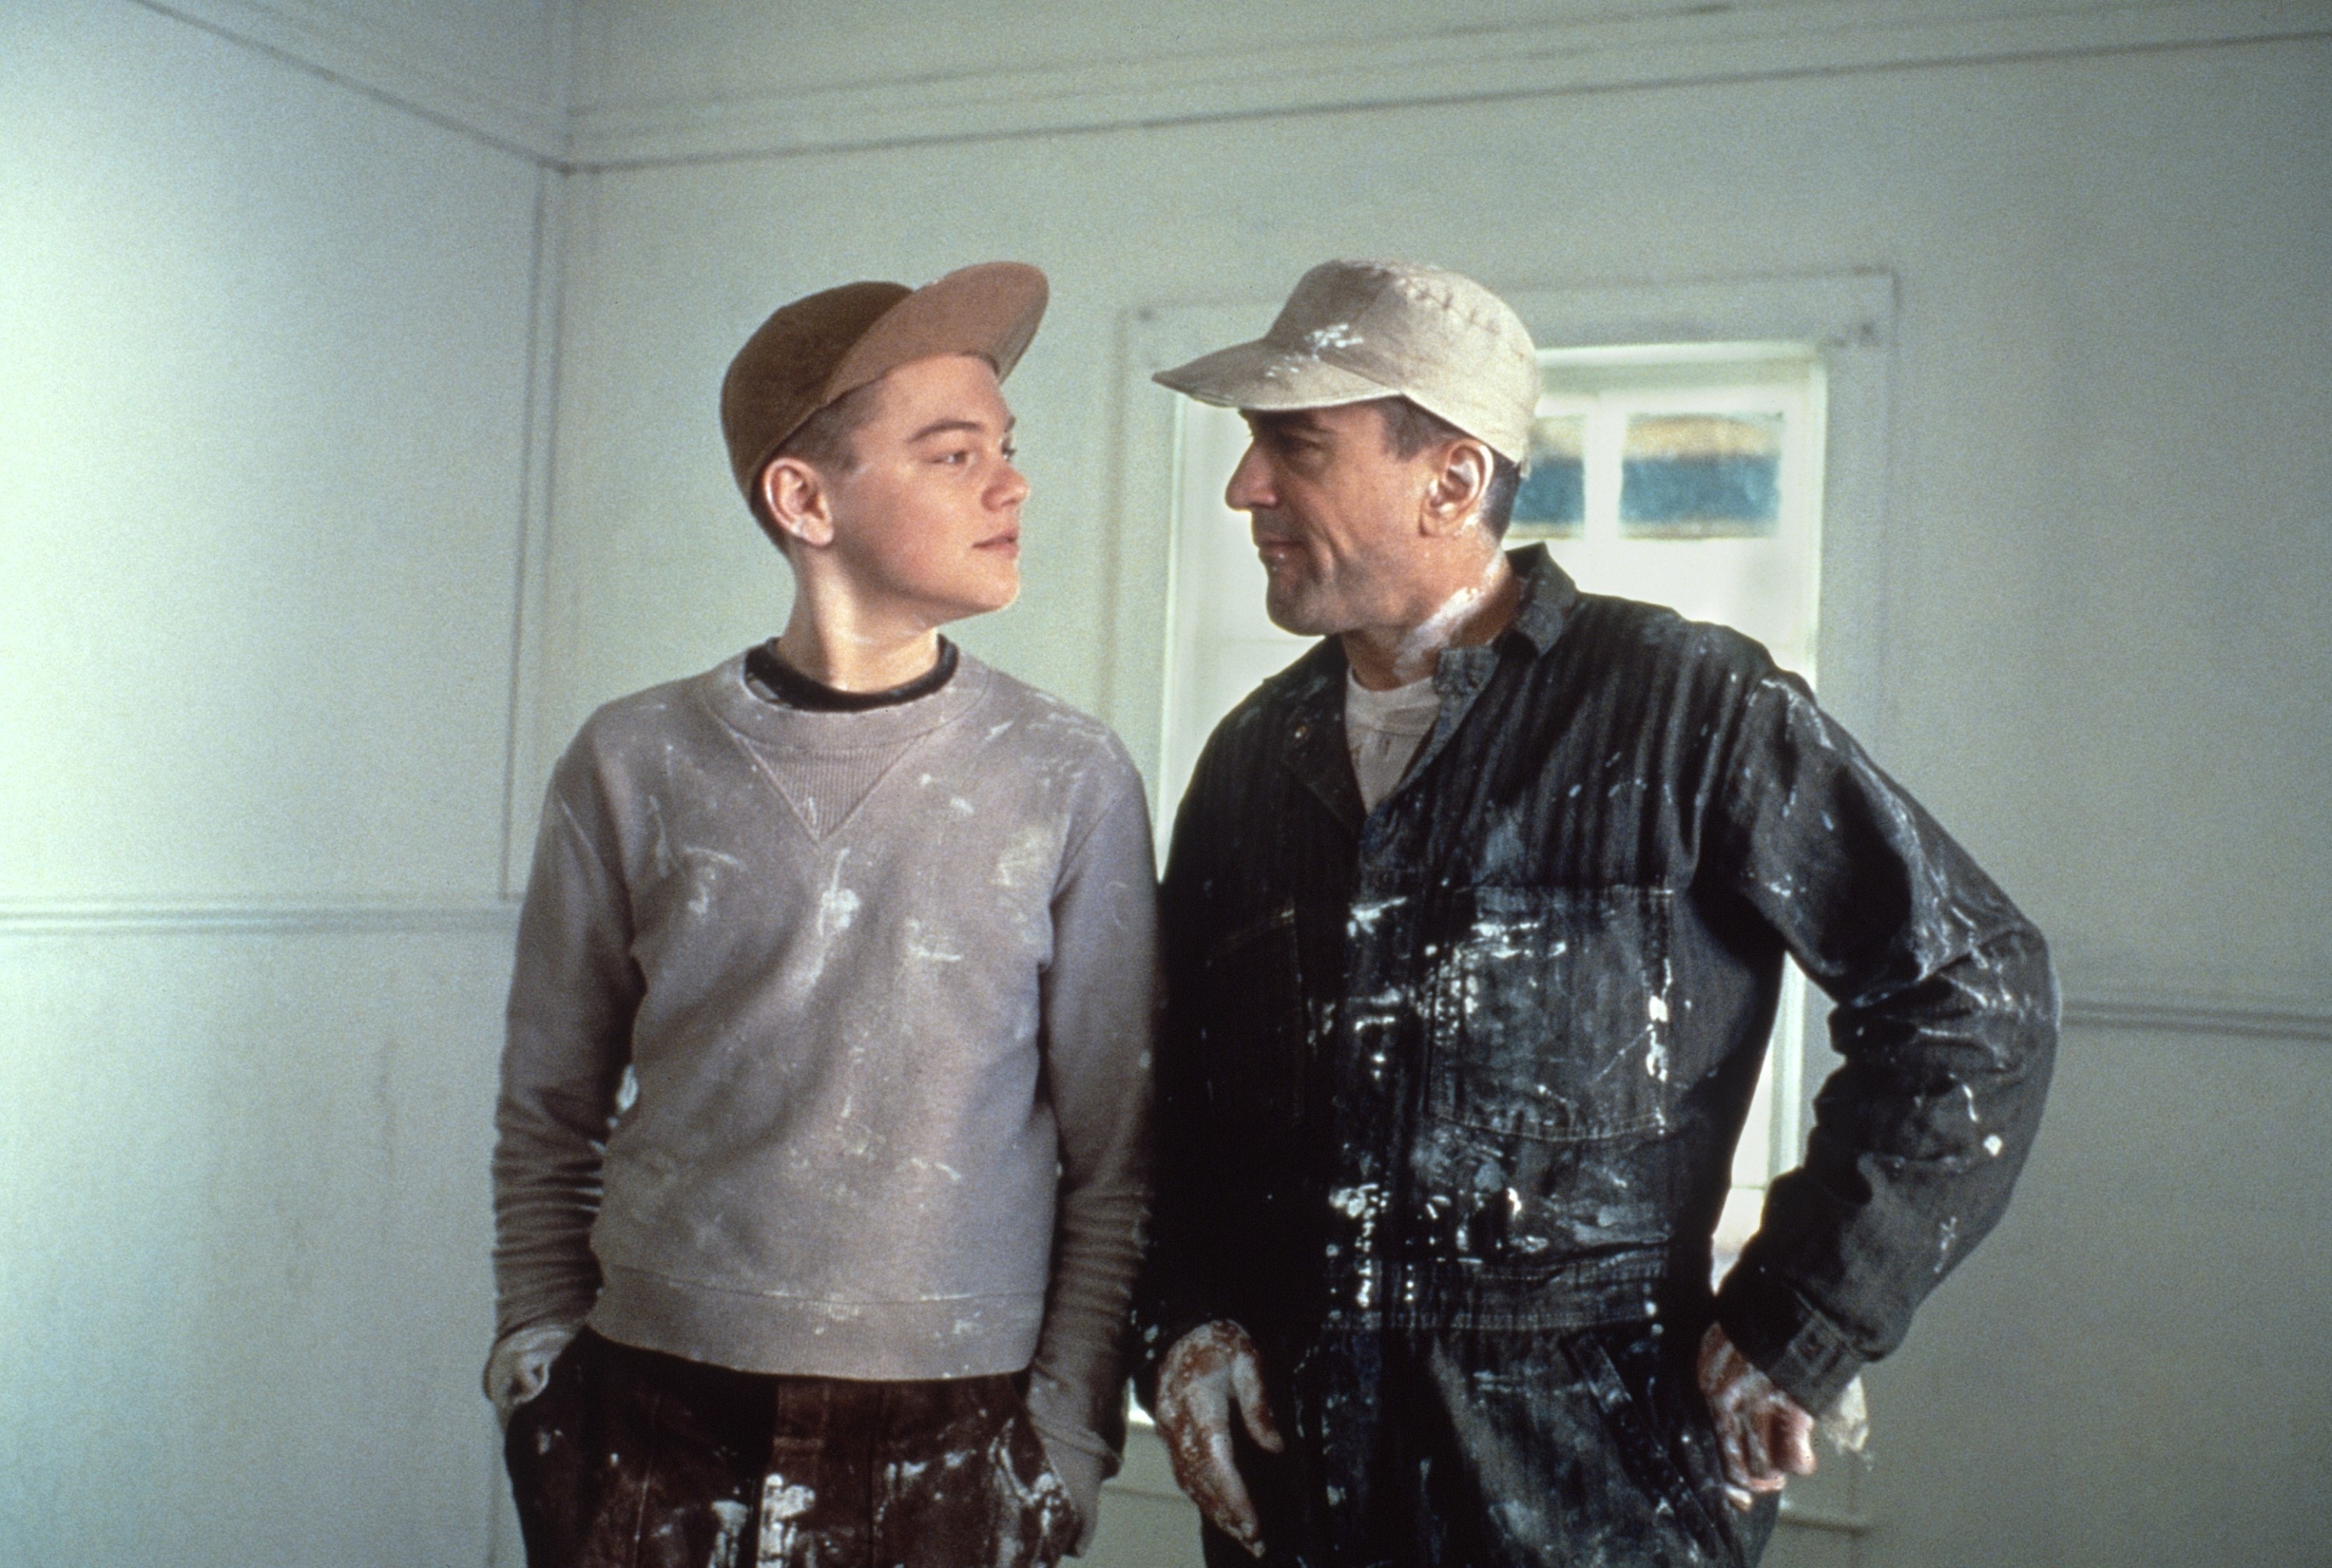 Leonardo DiCaprio and Robert De Niro look at each other after finishing painting